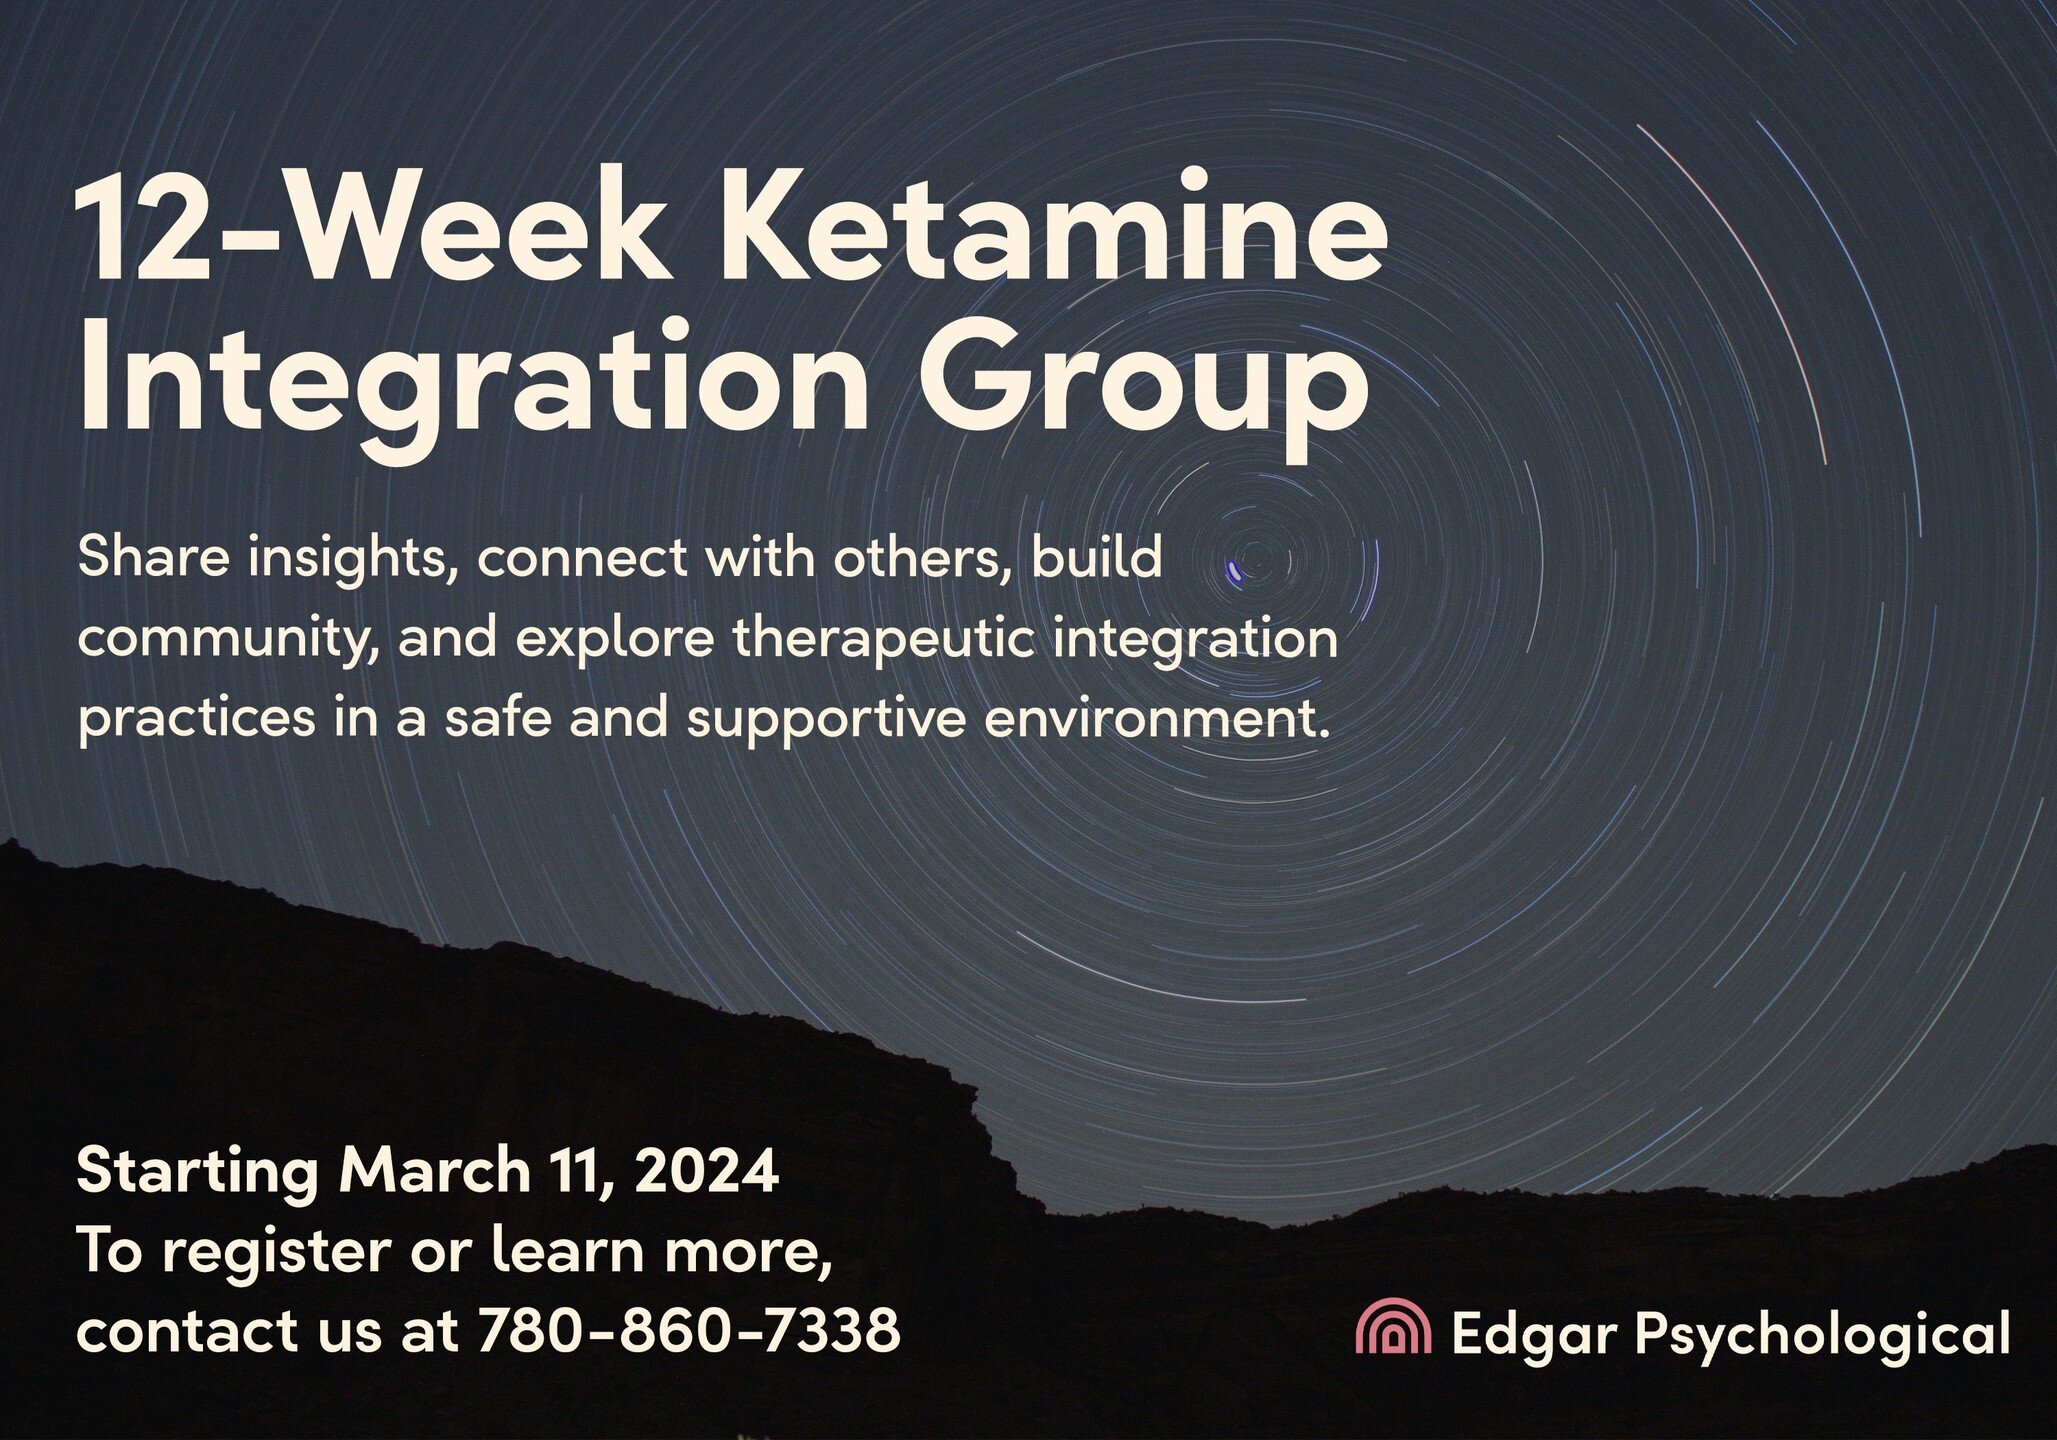 We have a 12-Week Ketamine Integration Group set to start on March 11, 2024. 

This 12-week program will offer opportunities to share insights, connect with others, build community, and explore therapeutic integration practices in a safe and supporti